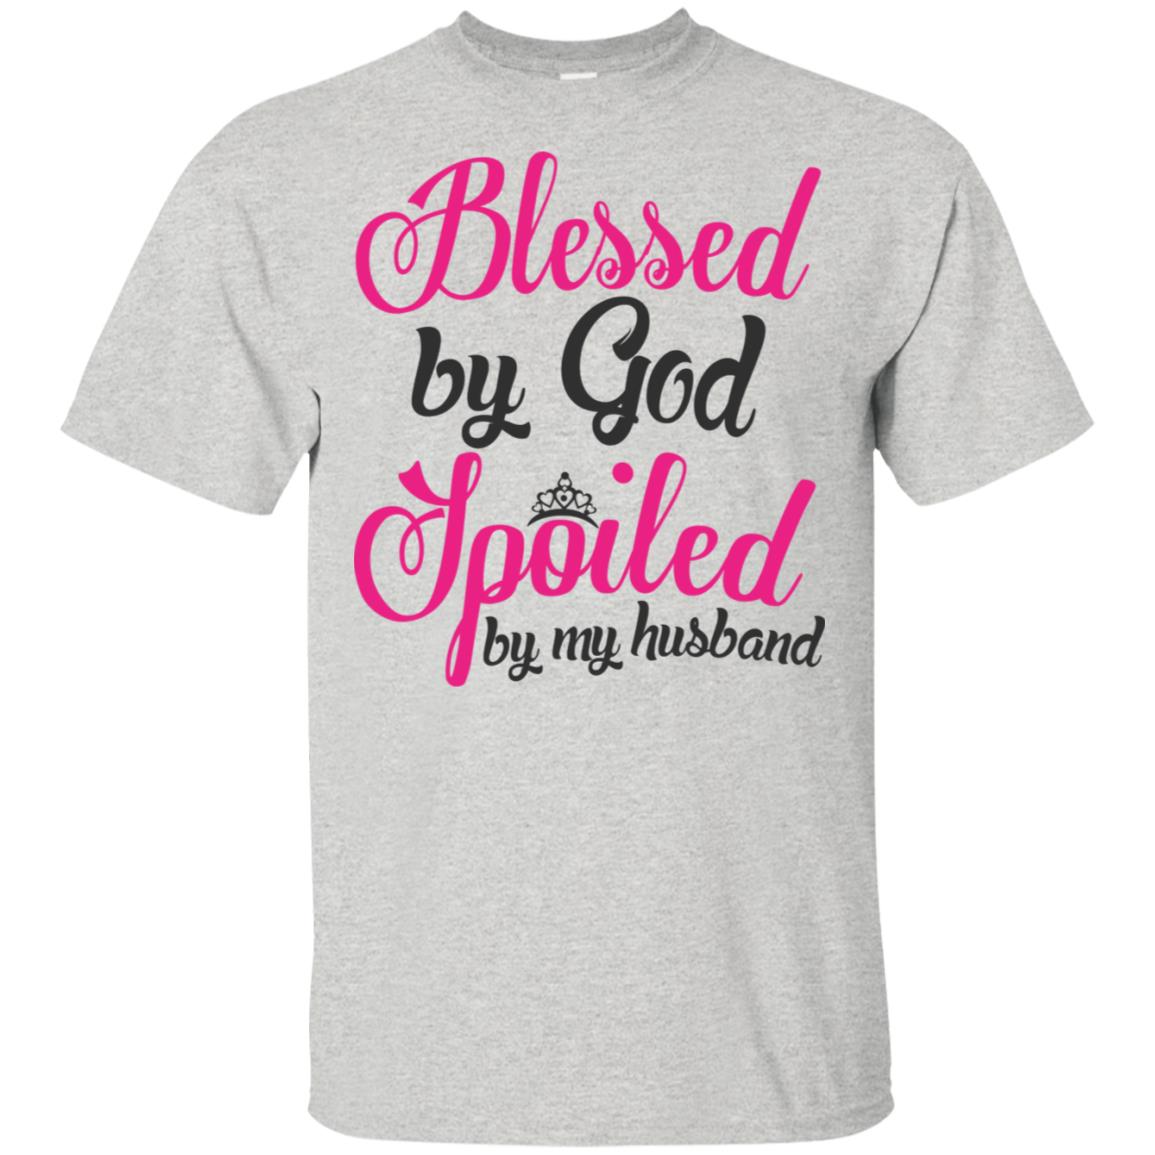 Blessed by god spoiled by my husband T-Shirt - AMZPrimeShirt